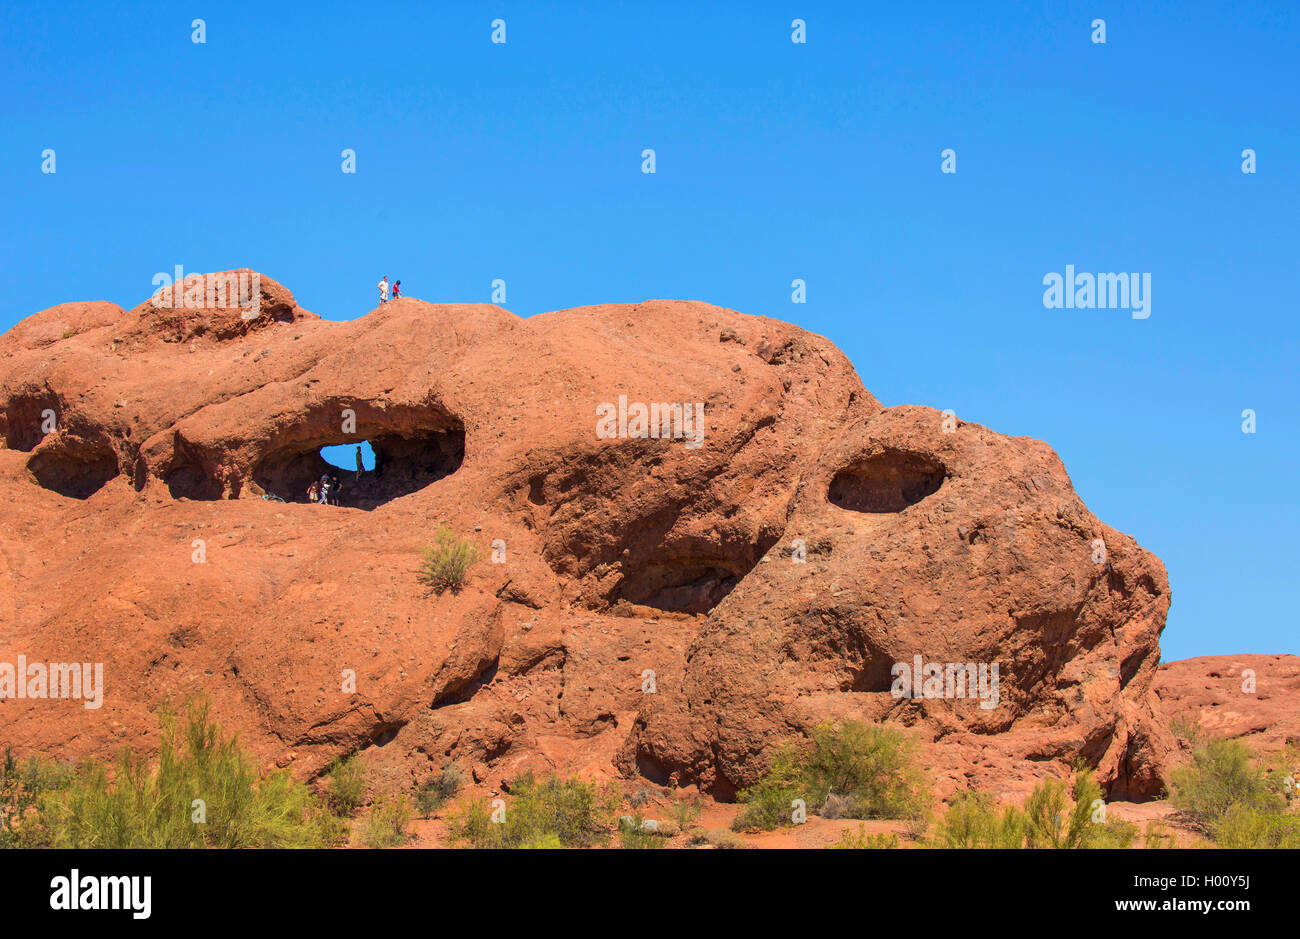 Hole-in-the-Rock, cave in red sandstone with climbing tourists, USA, Arizona, Papago Park, Phoenix Stock Photo